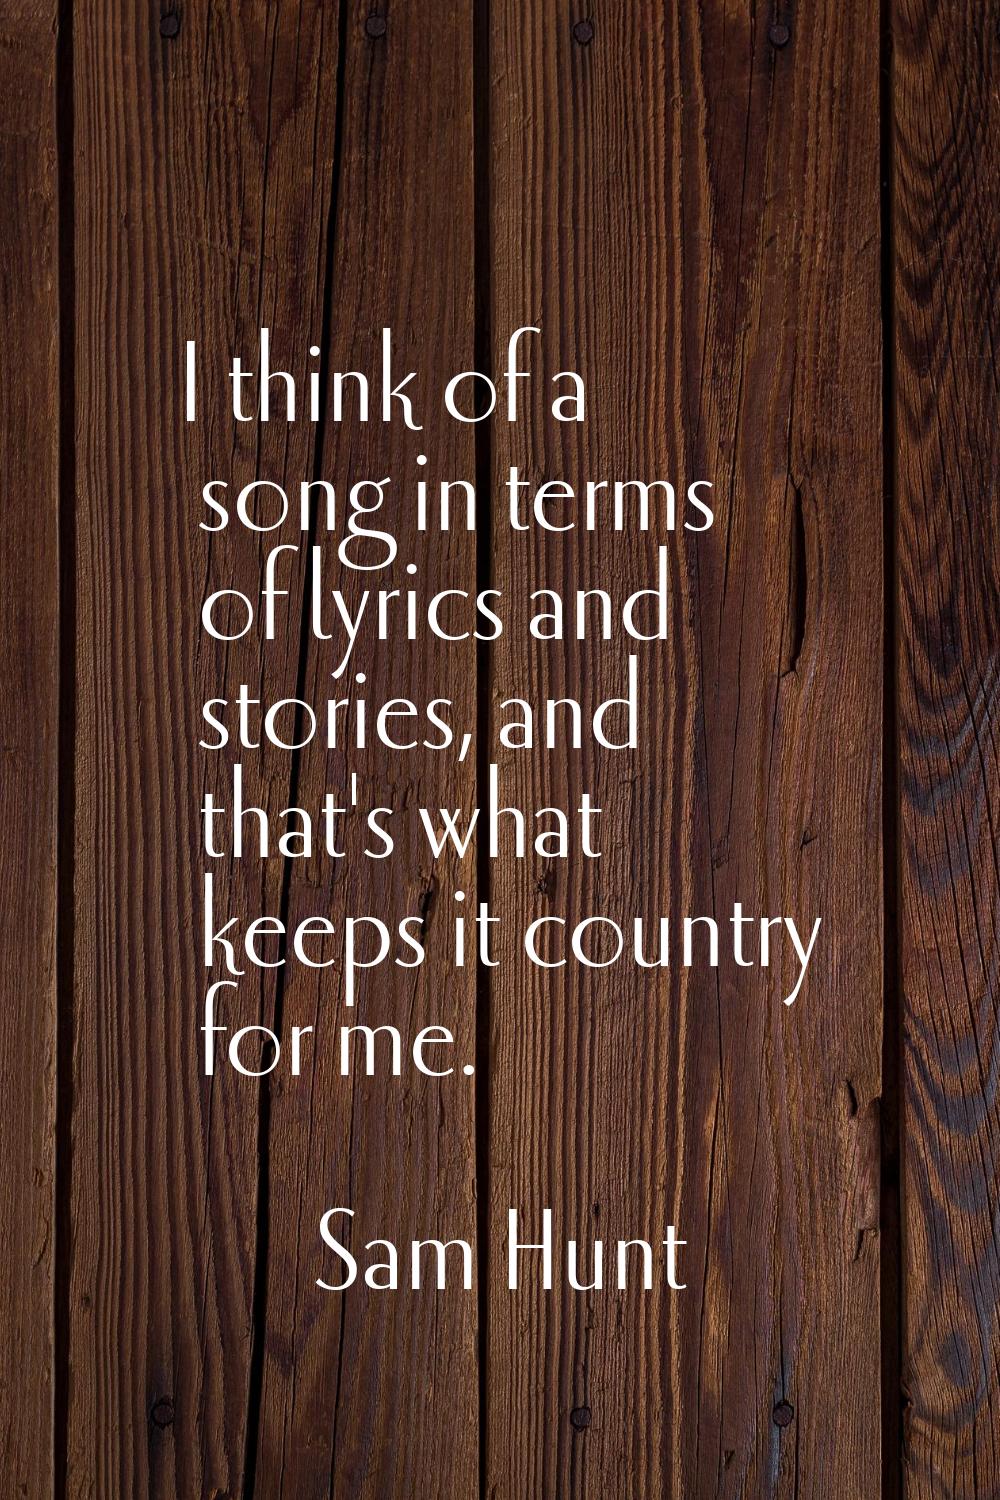 I think of a song in terms of lyrics and stories, and that's what keeps it country for me.